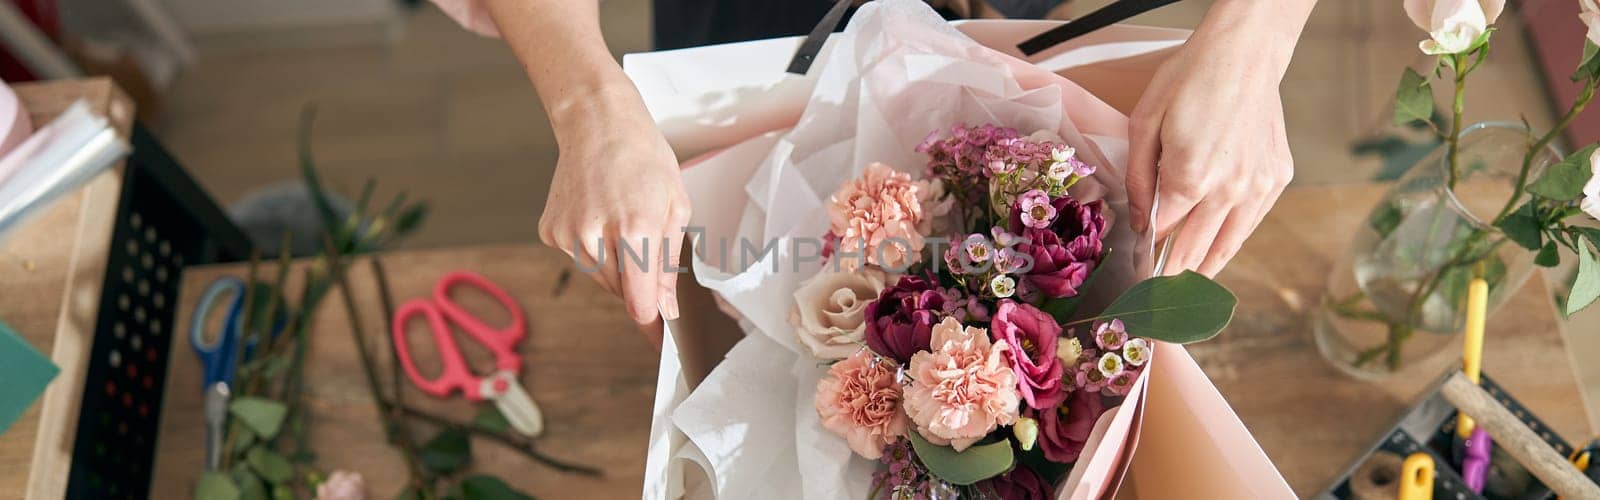 Professional florist young woman is doing bouquets at flower shop by Yaroslav_astakhov